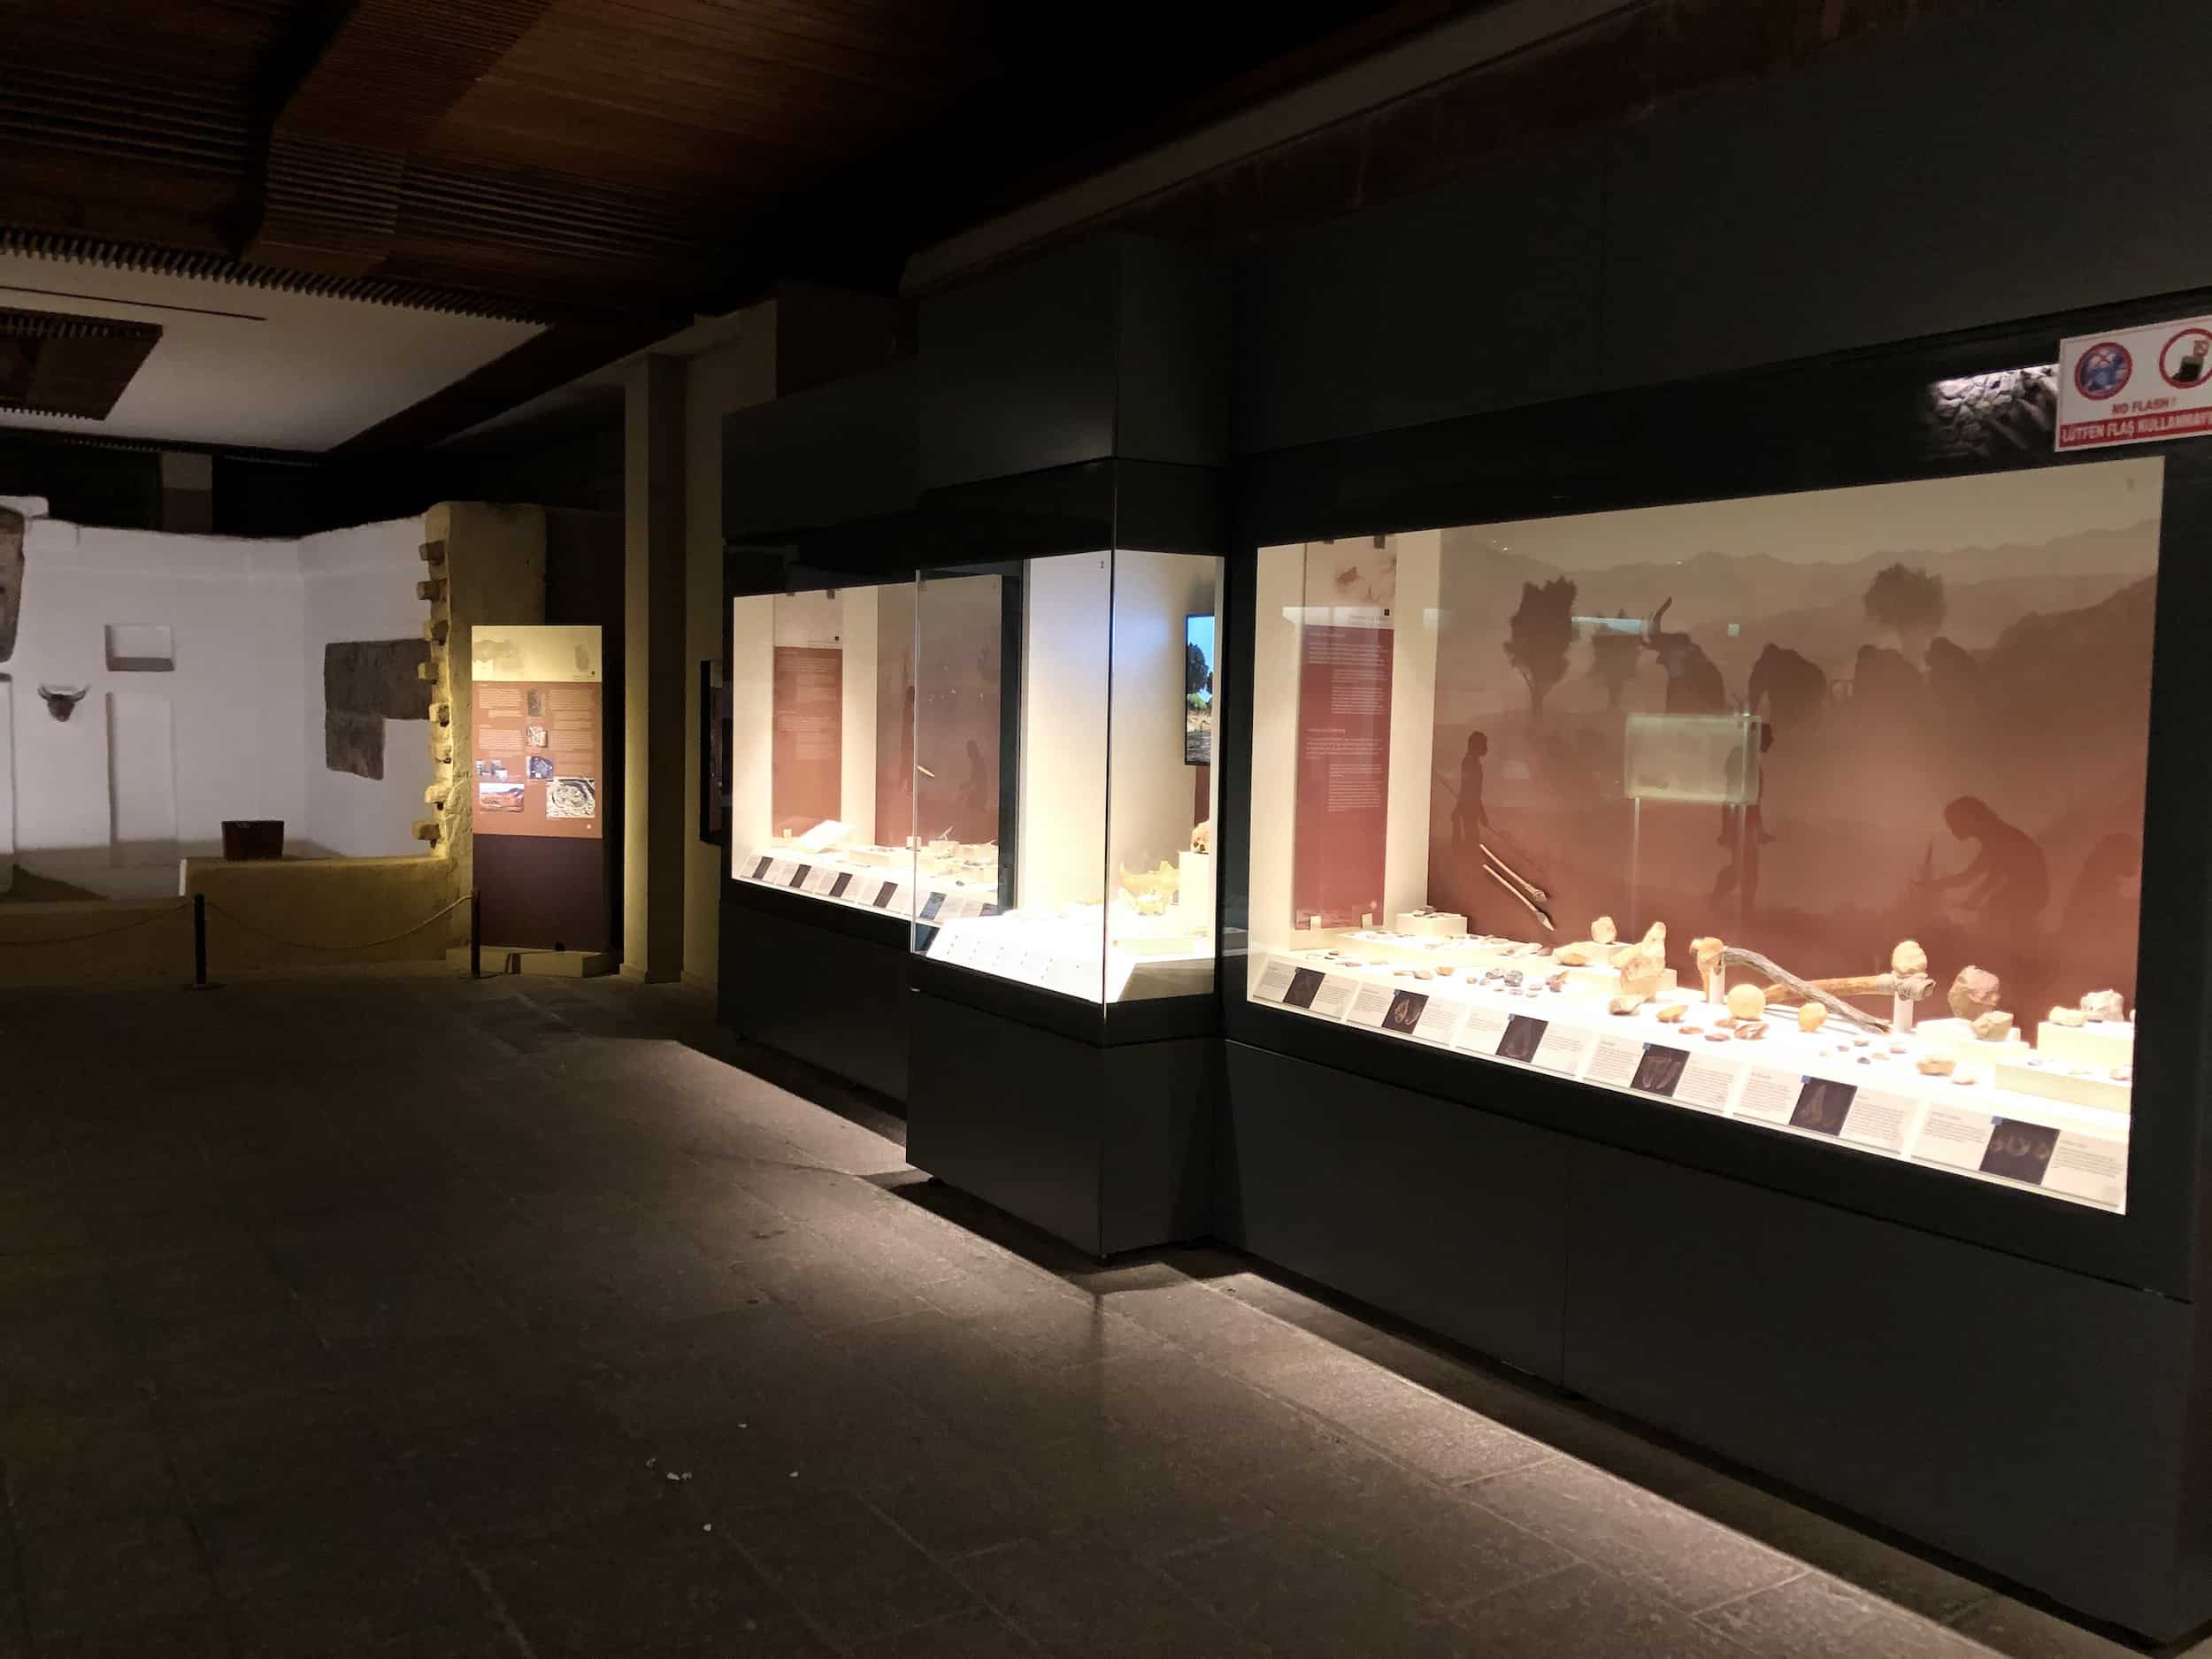 Paleolithic Age section at the Museum of Anatolian Civilizations in Ankara, Turkey